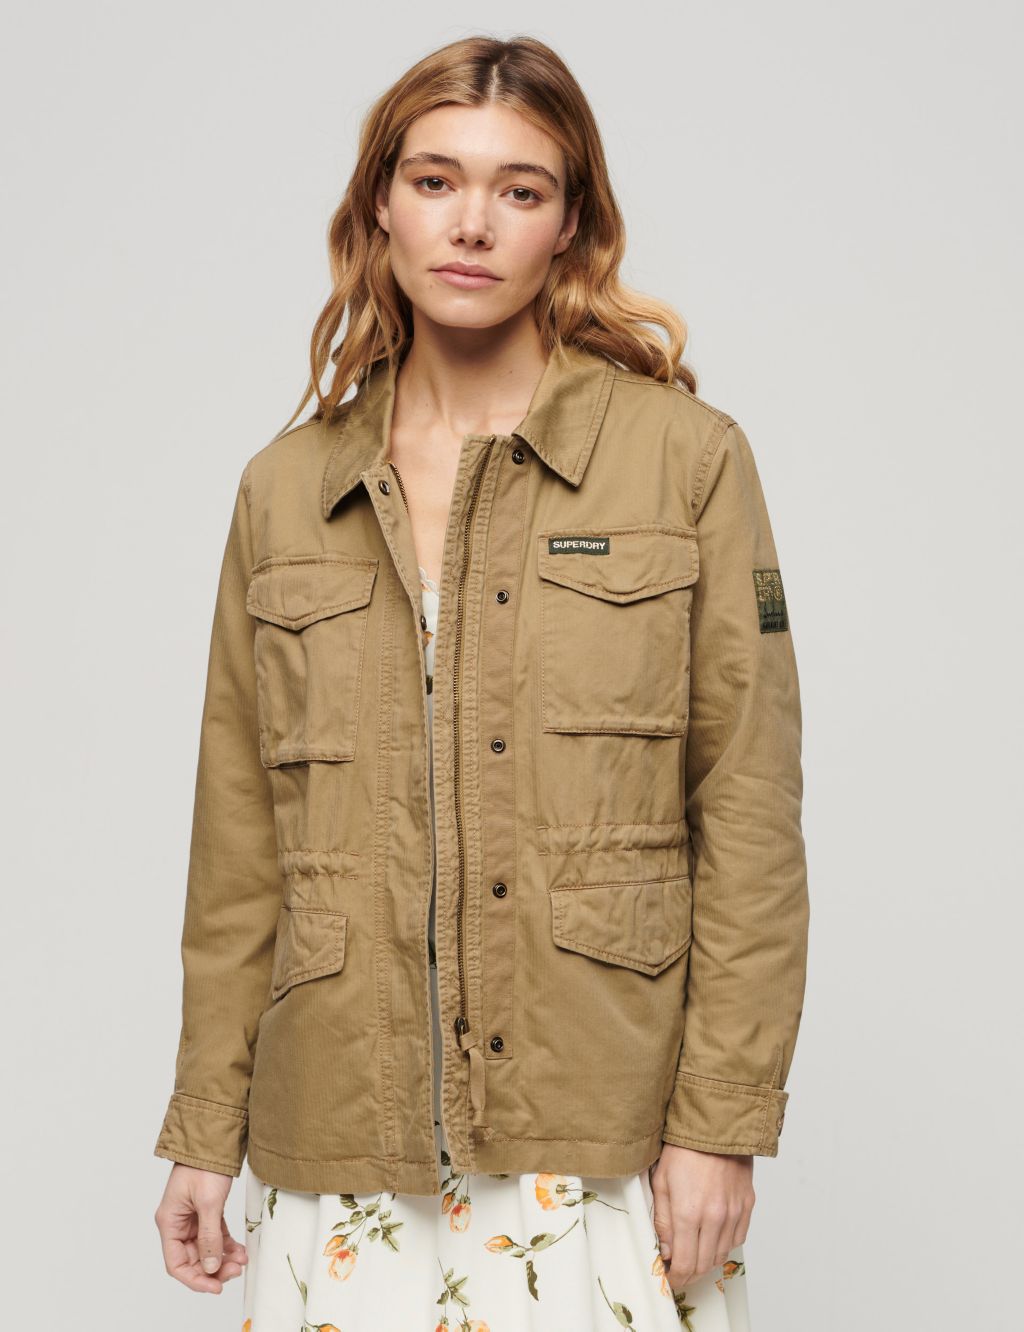 Collared Relaxed Utility Jacket